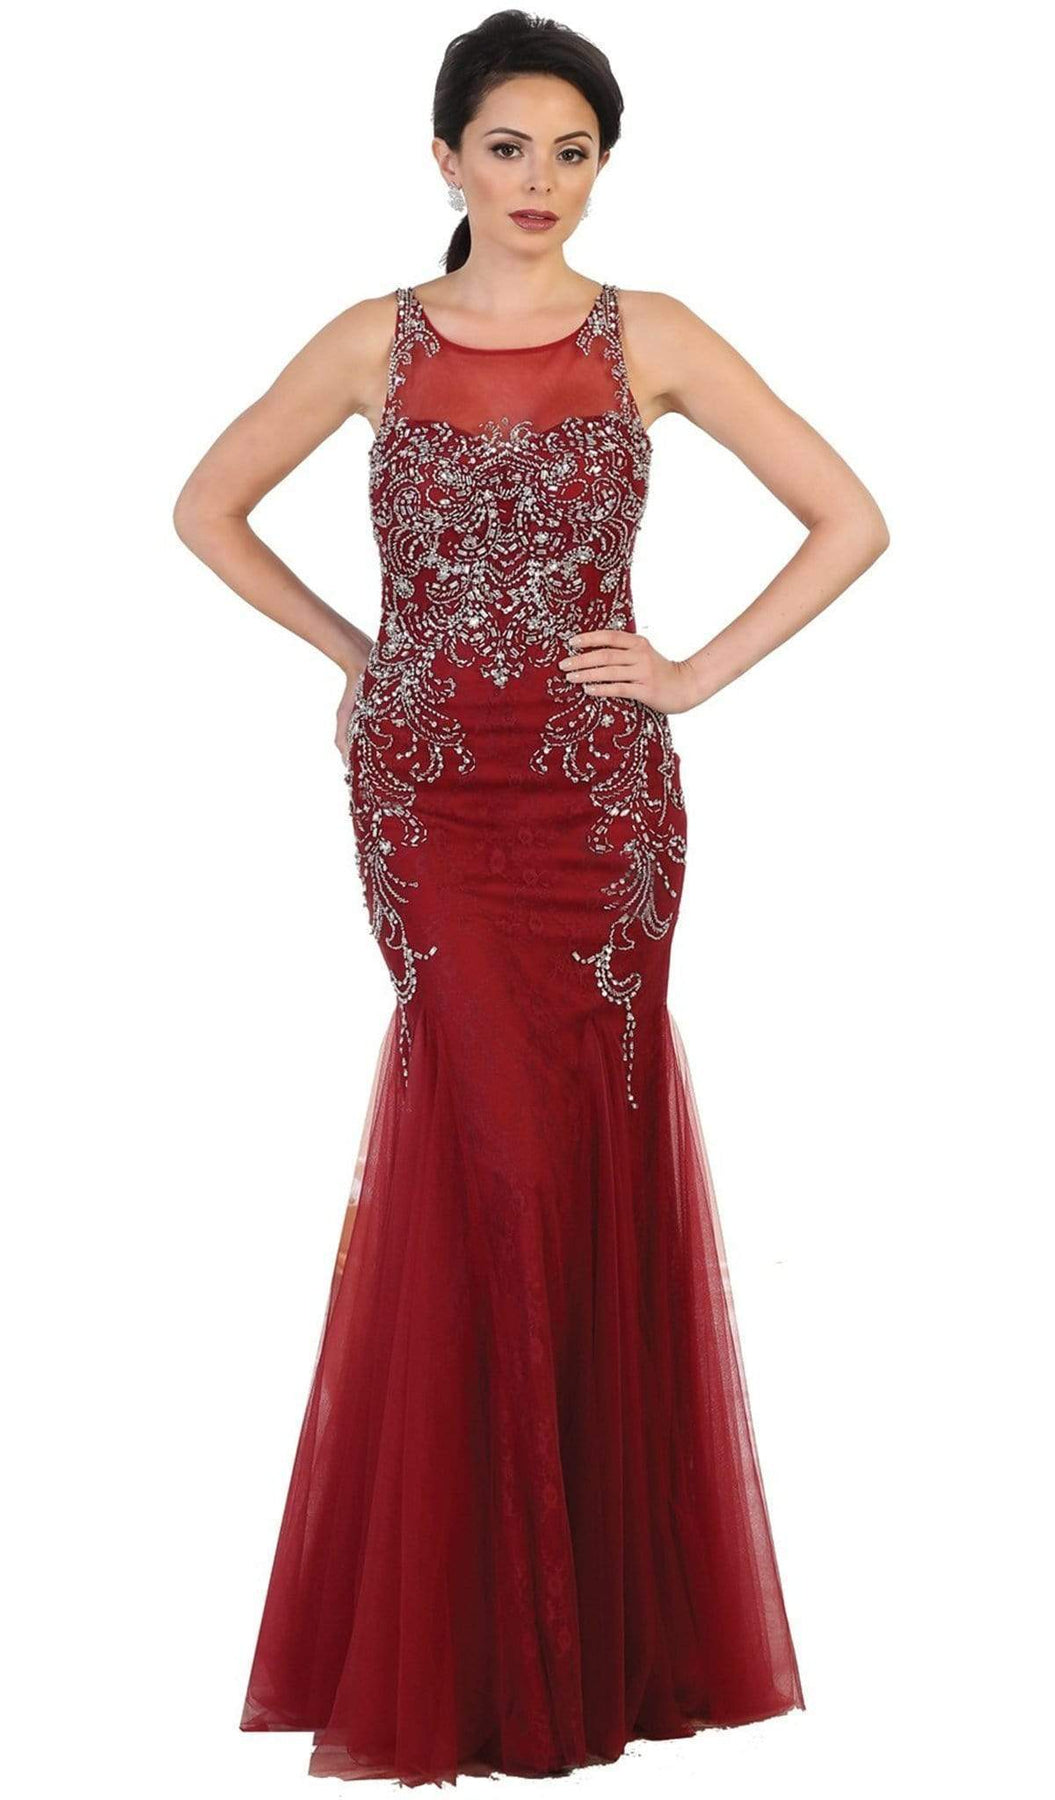 May Queen - Bedazzled Illusion Bateau Trumpet Prom Dress Special Occasion Dress 4 / Burgundy